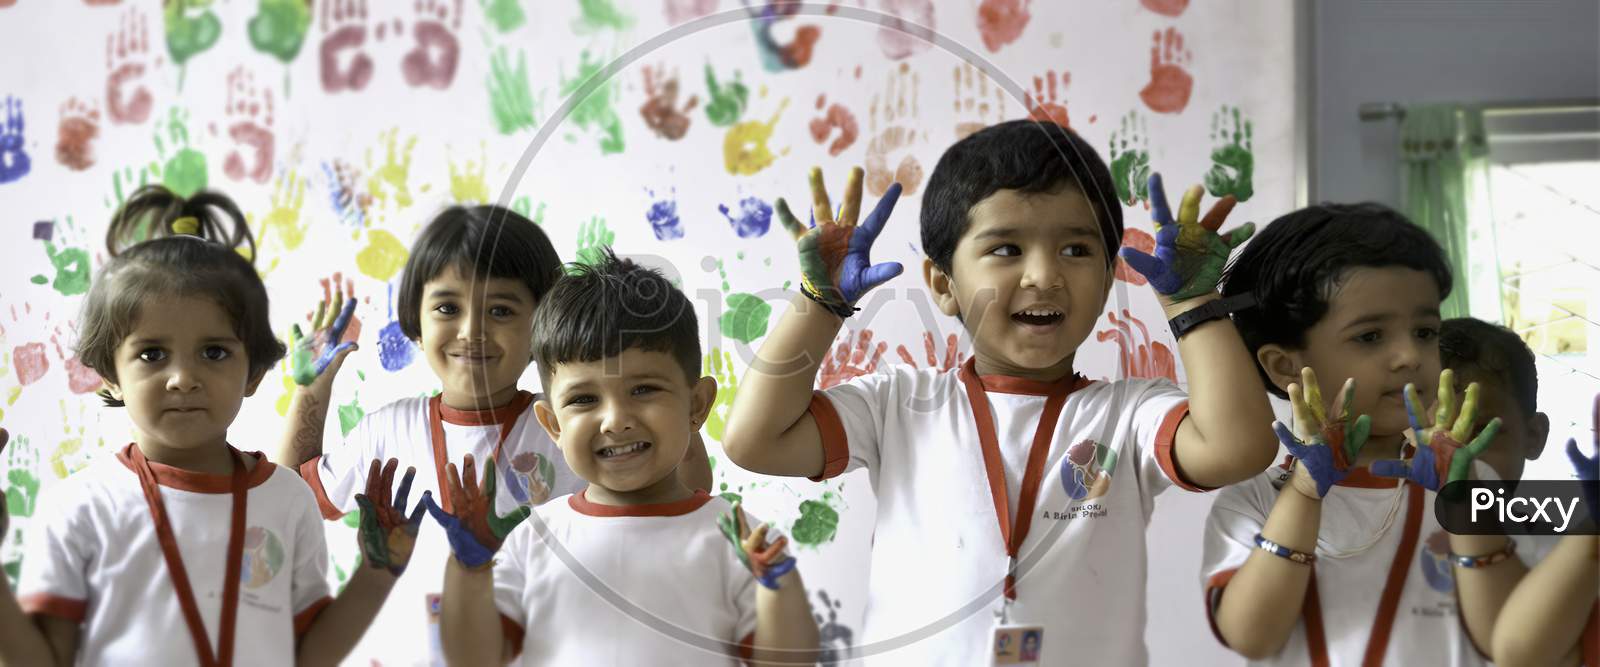 Indian Children drawing in the nursery . color in the hand of children.